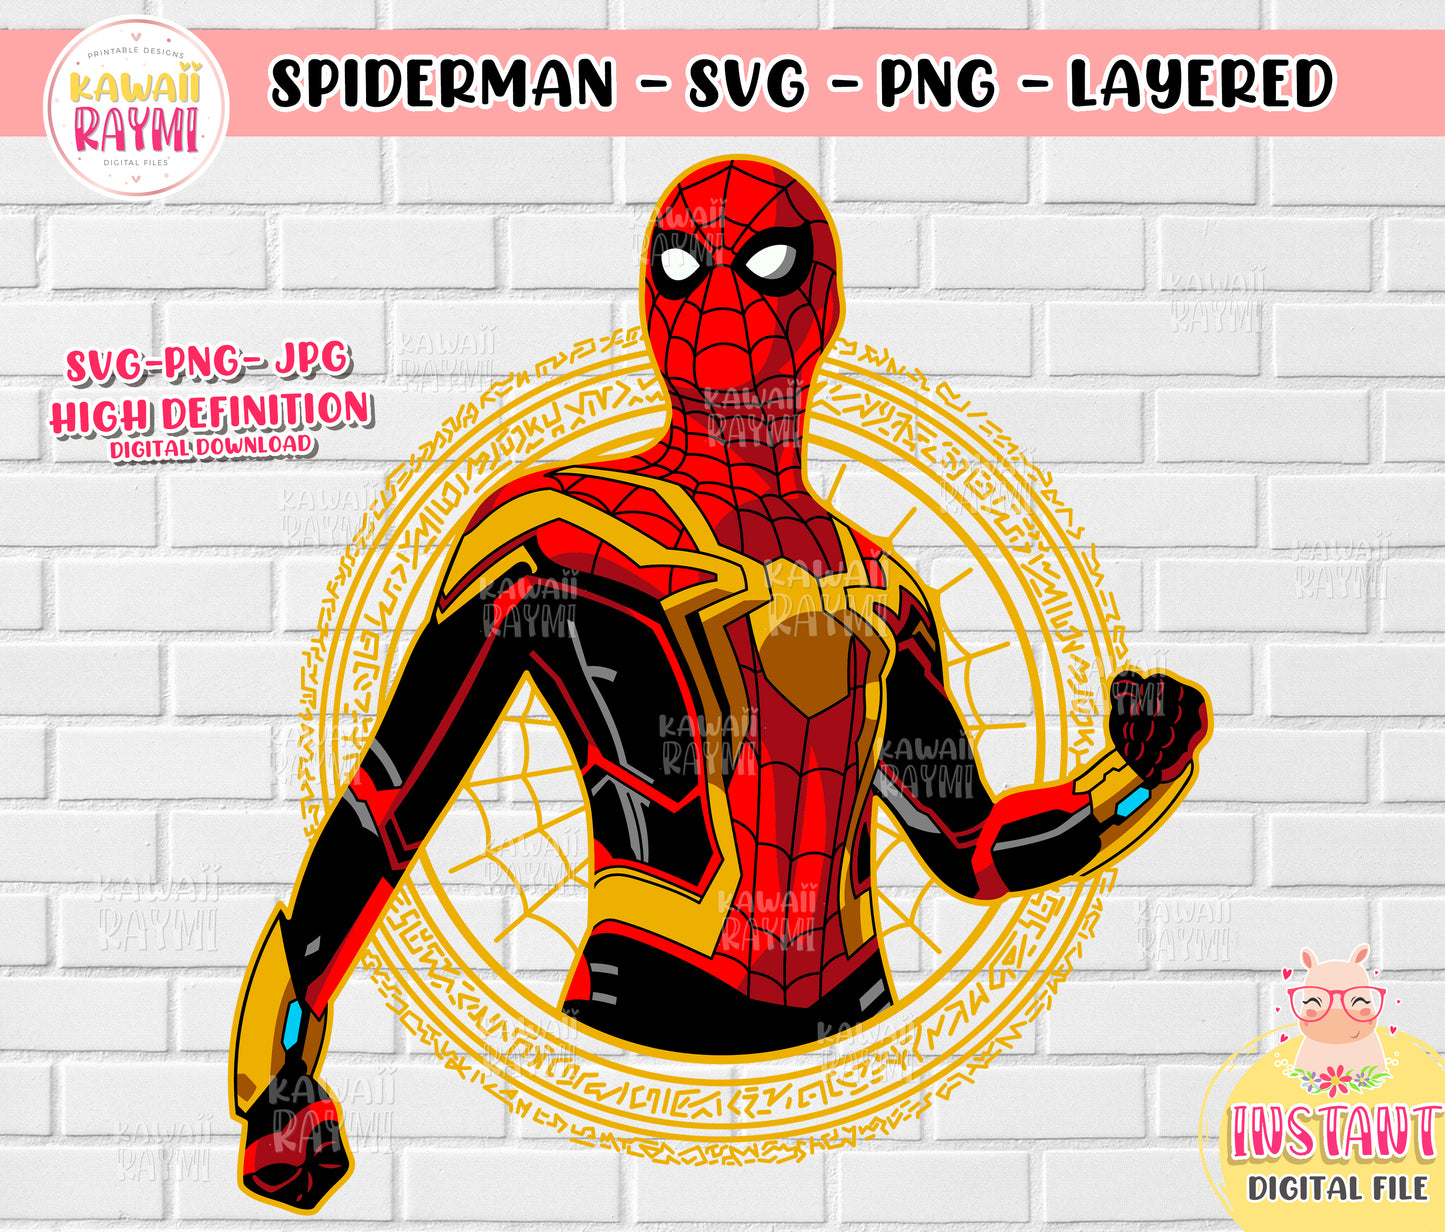 Spiderman svg, spiderman no way home svg, cricut, cut file, png, layered, sublimation